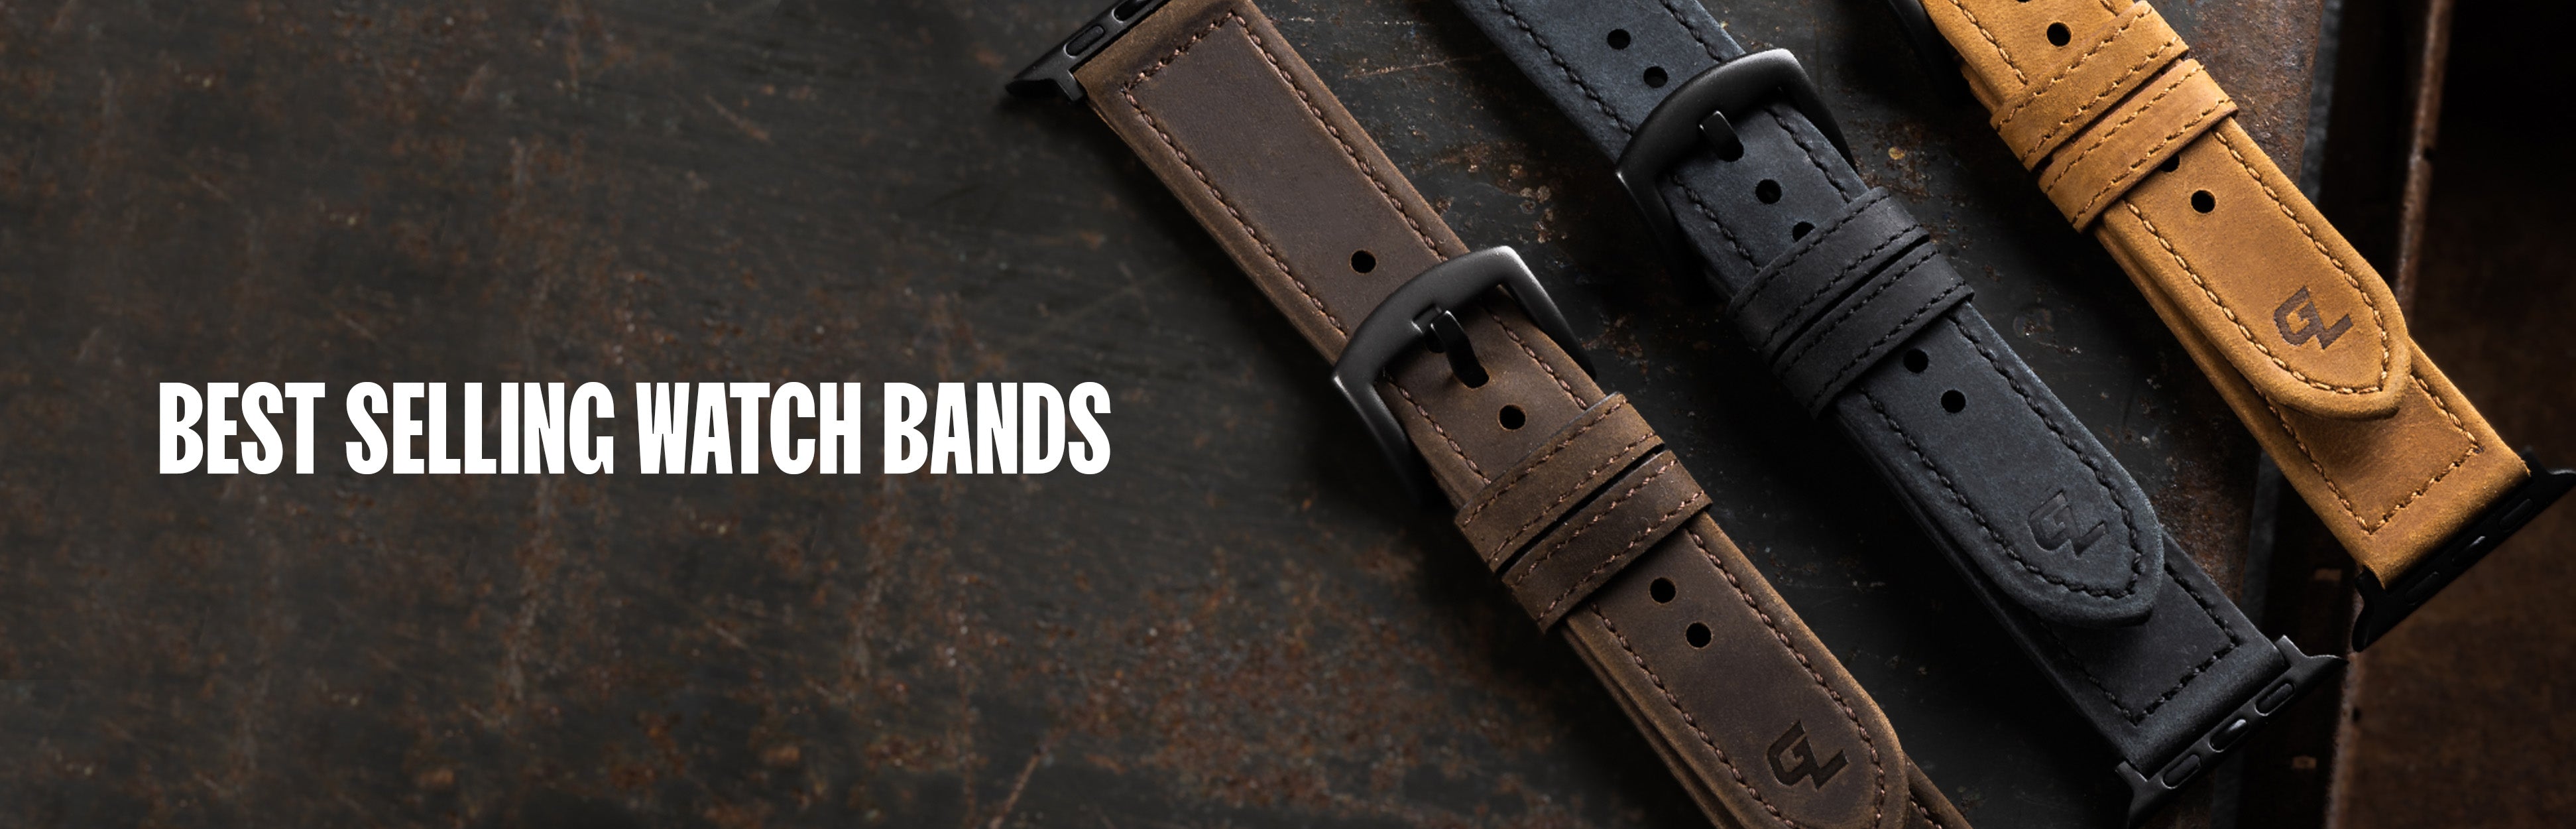 Best Selling Watch Bands